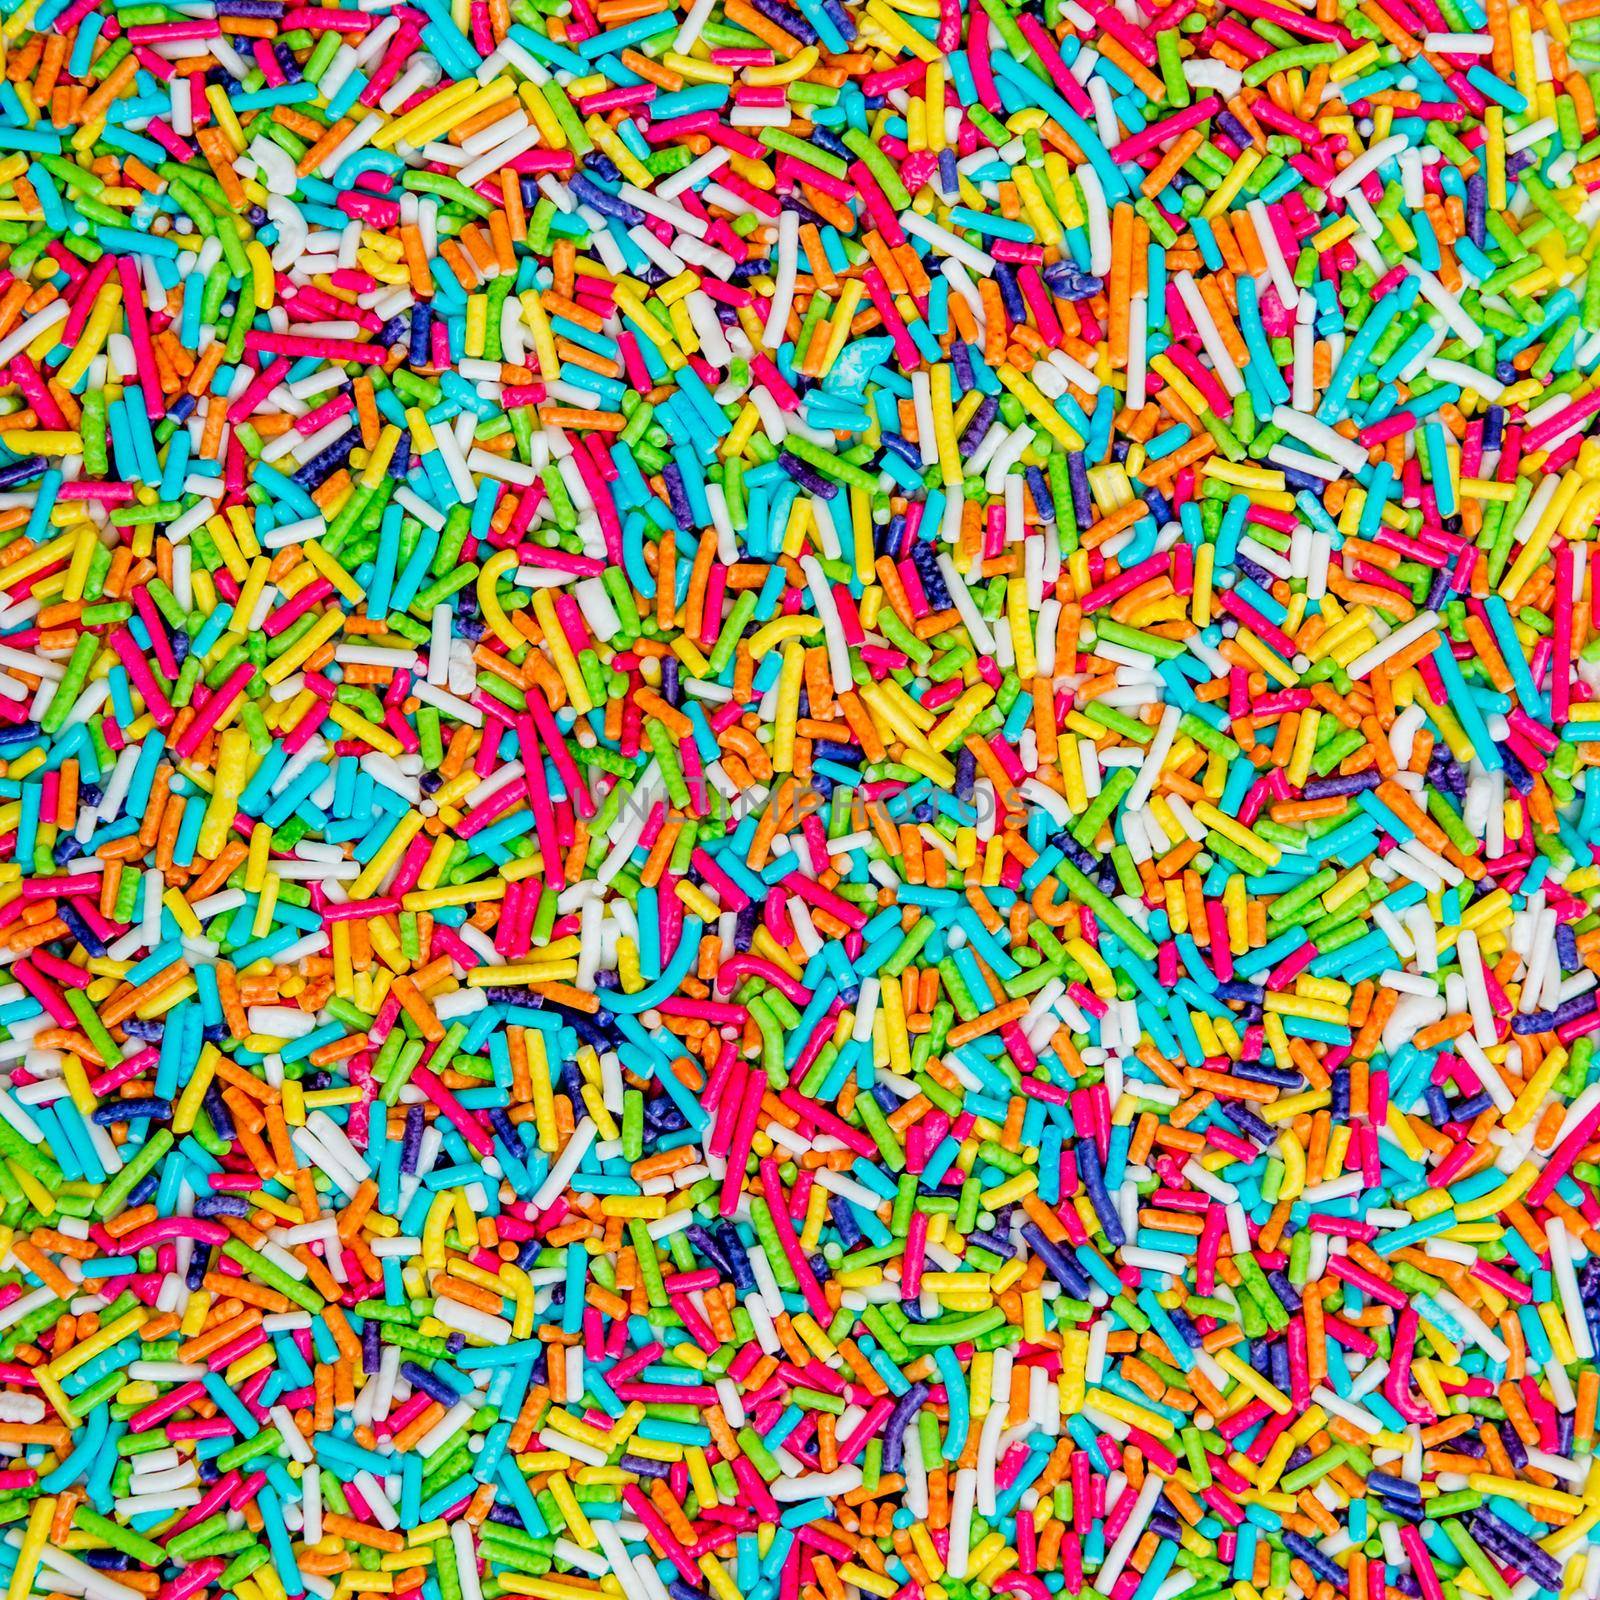 Background of colorful sprinkles by tan4ikk1